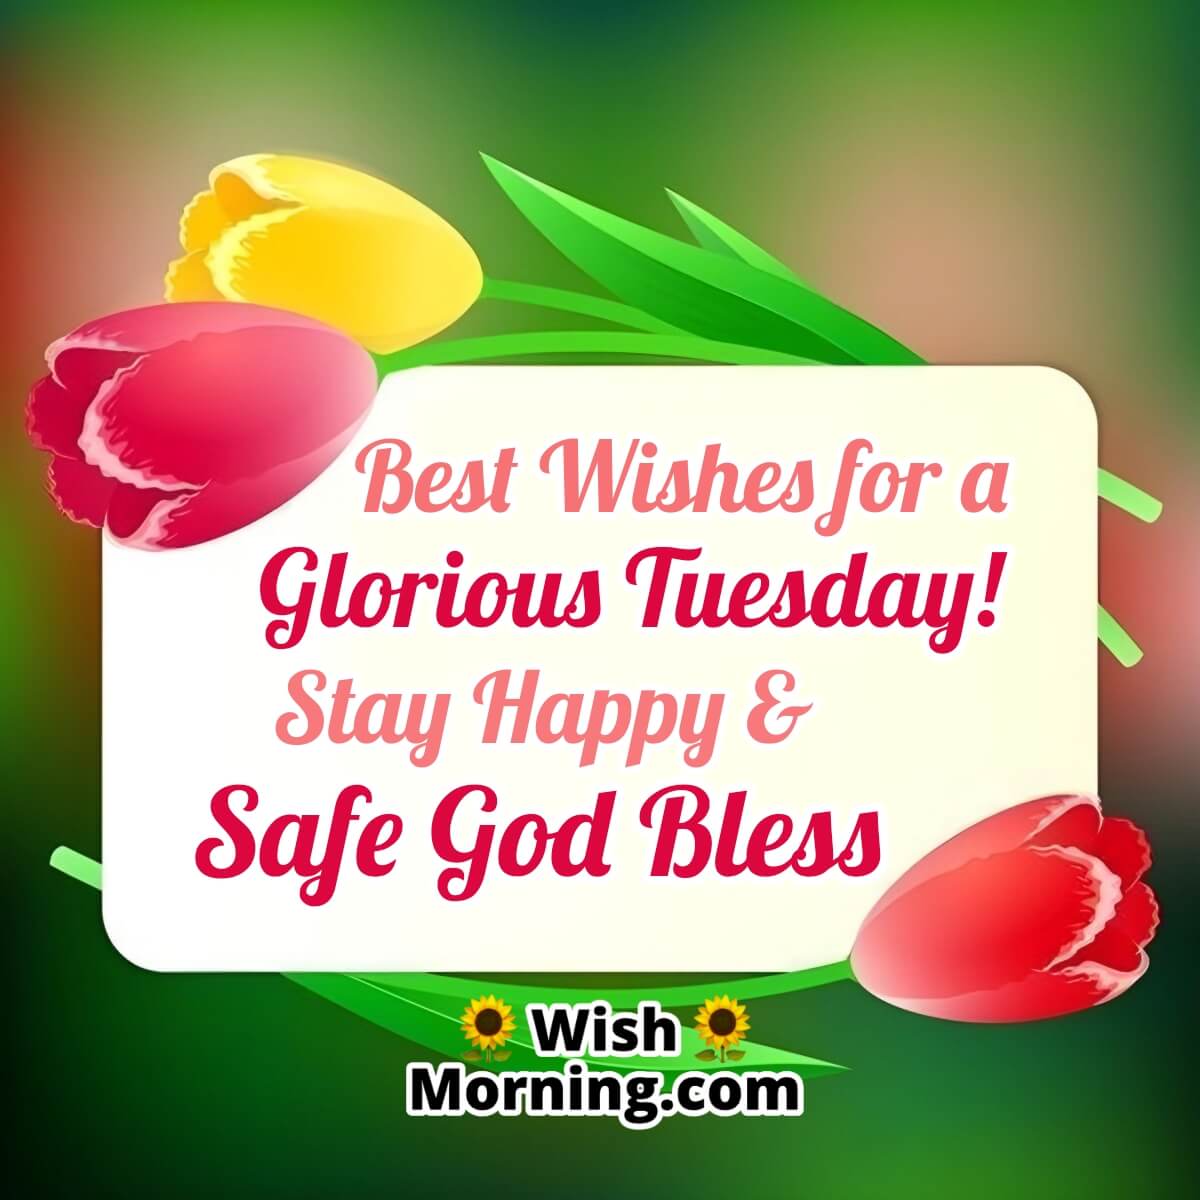 Best Wishes For A Glorious Tuesday!